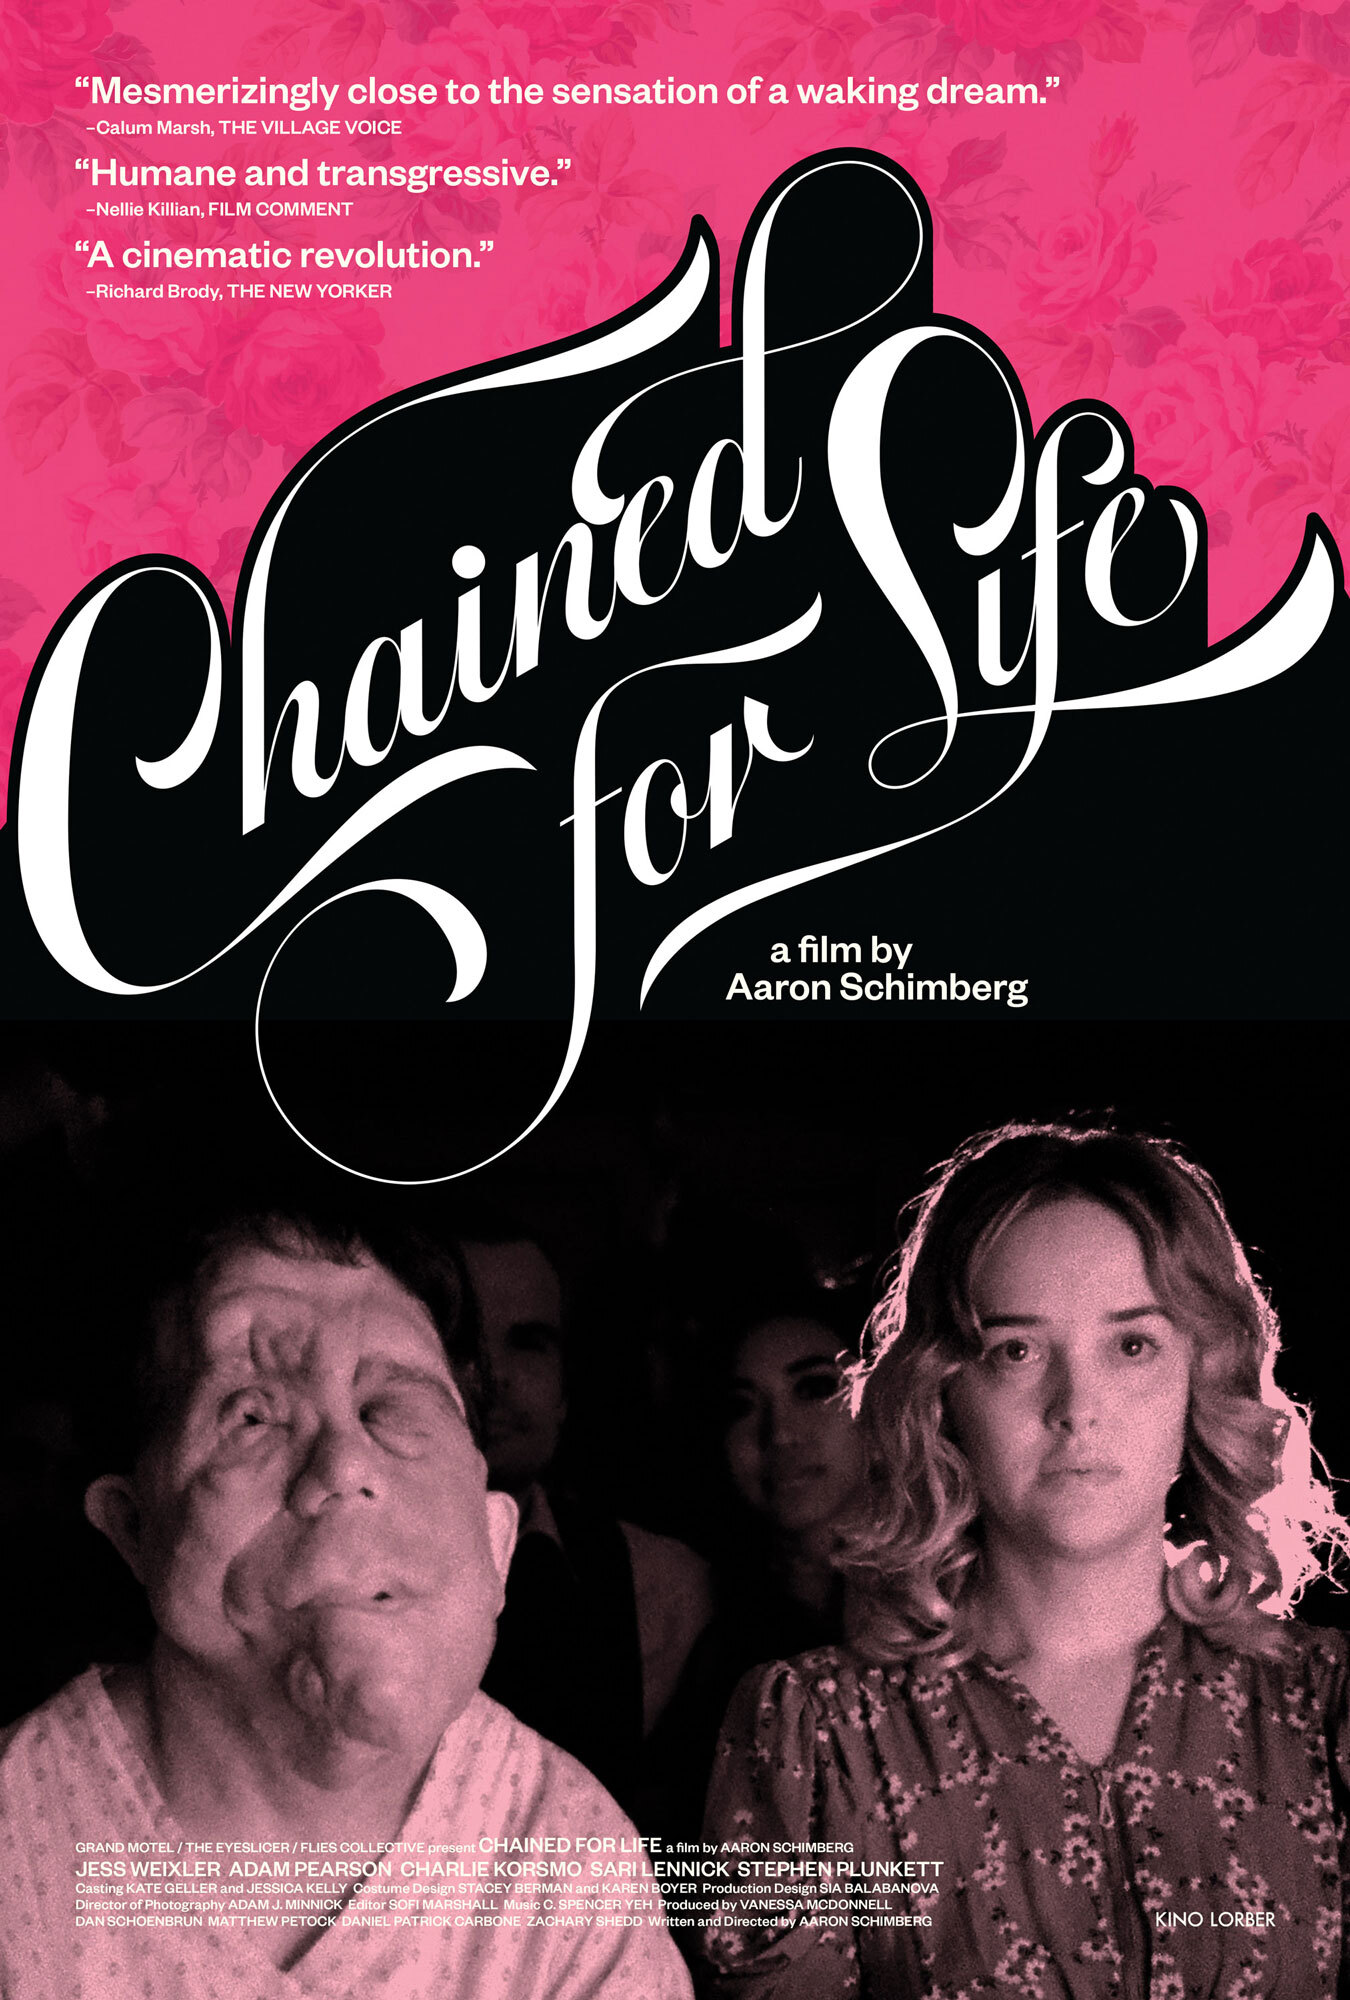 Chained for Life (19h00)